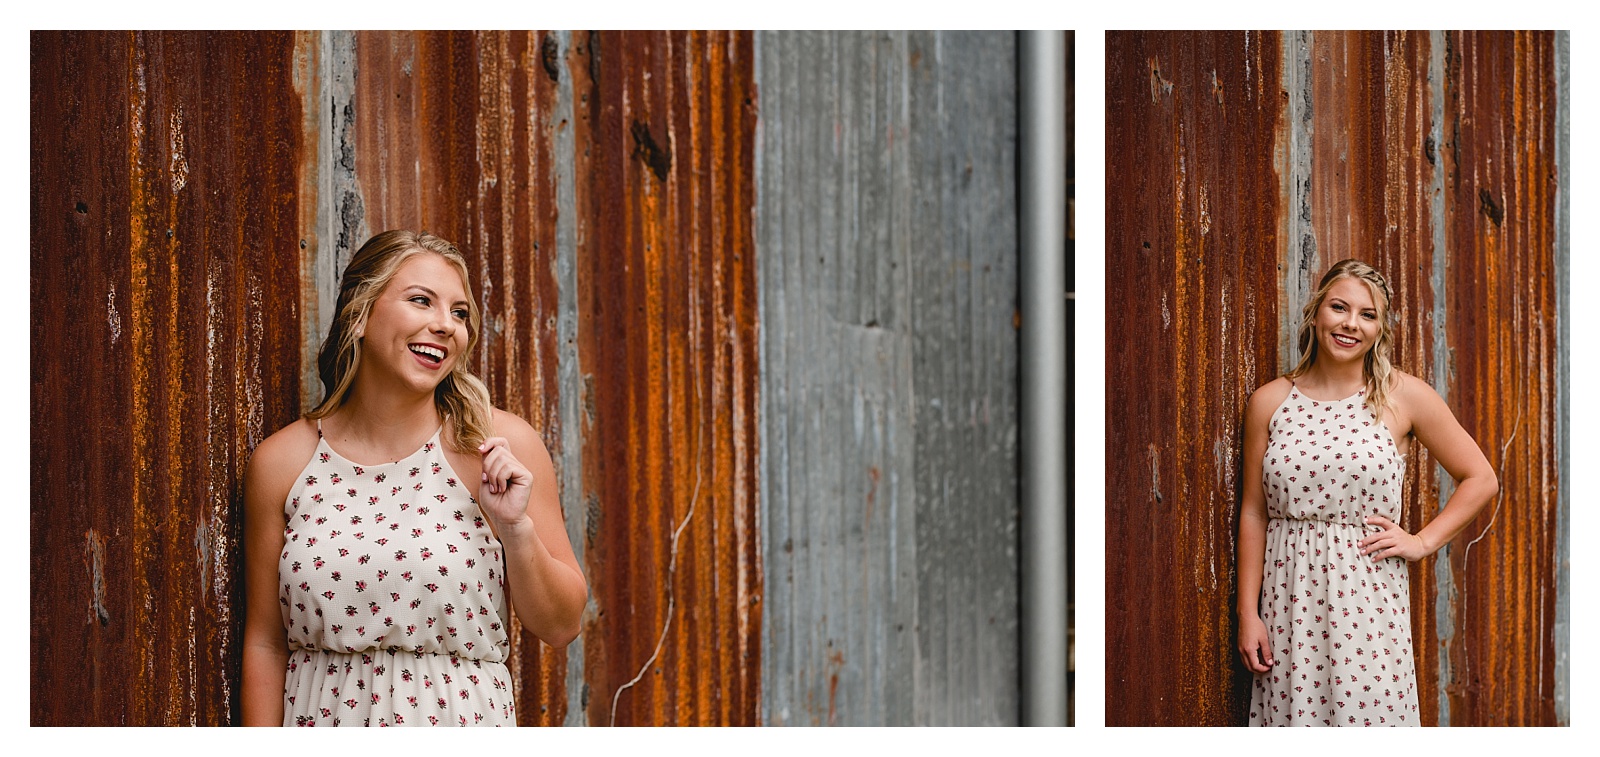 Rusted and old wall for senior portraits by professional Shelly Williams Photography